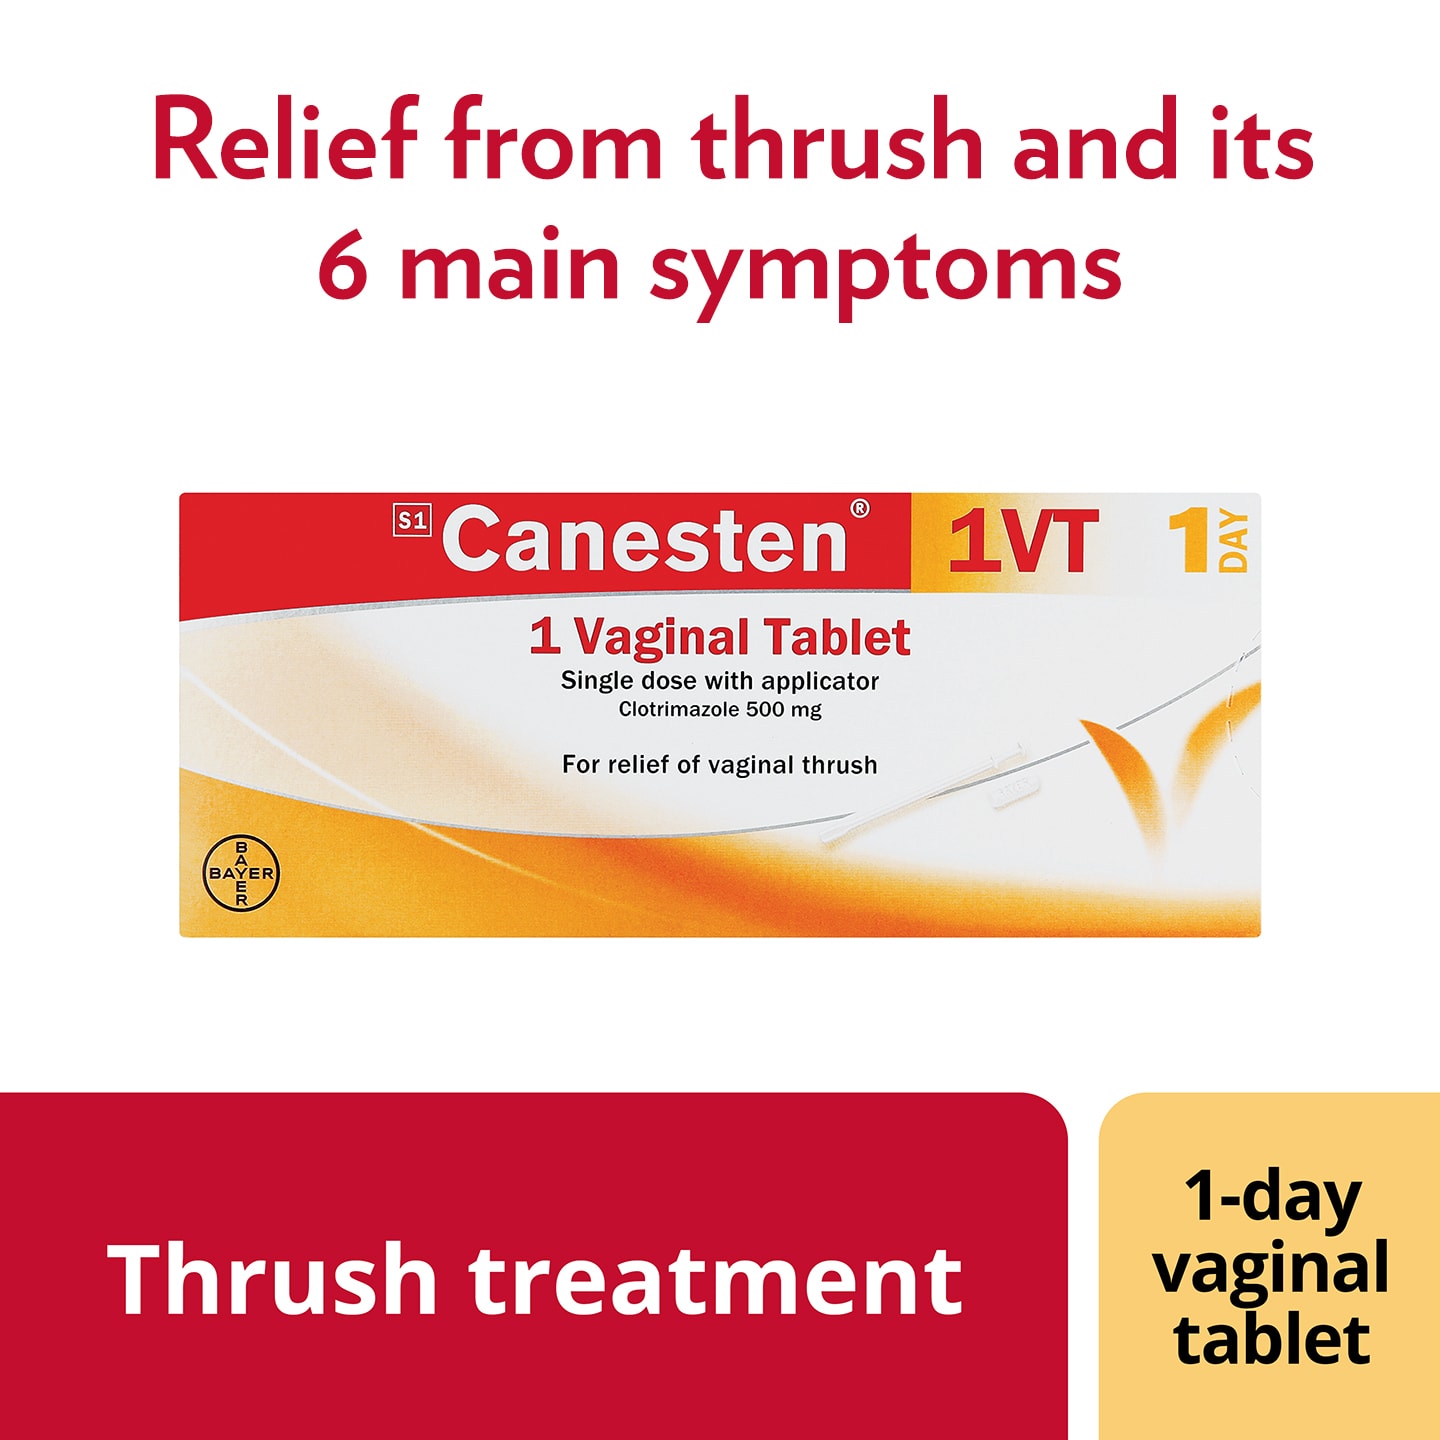 Thrush treatment: Canesten Thrush 500mg vaginal tablet, with caption on top: Complete relief from thrush and its 6 main symptoms